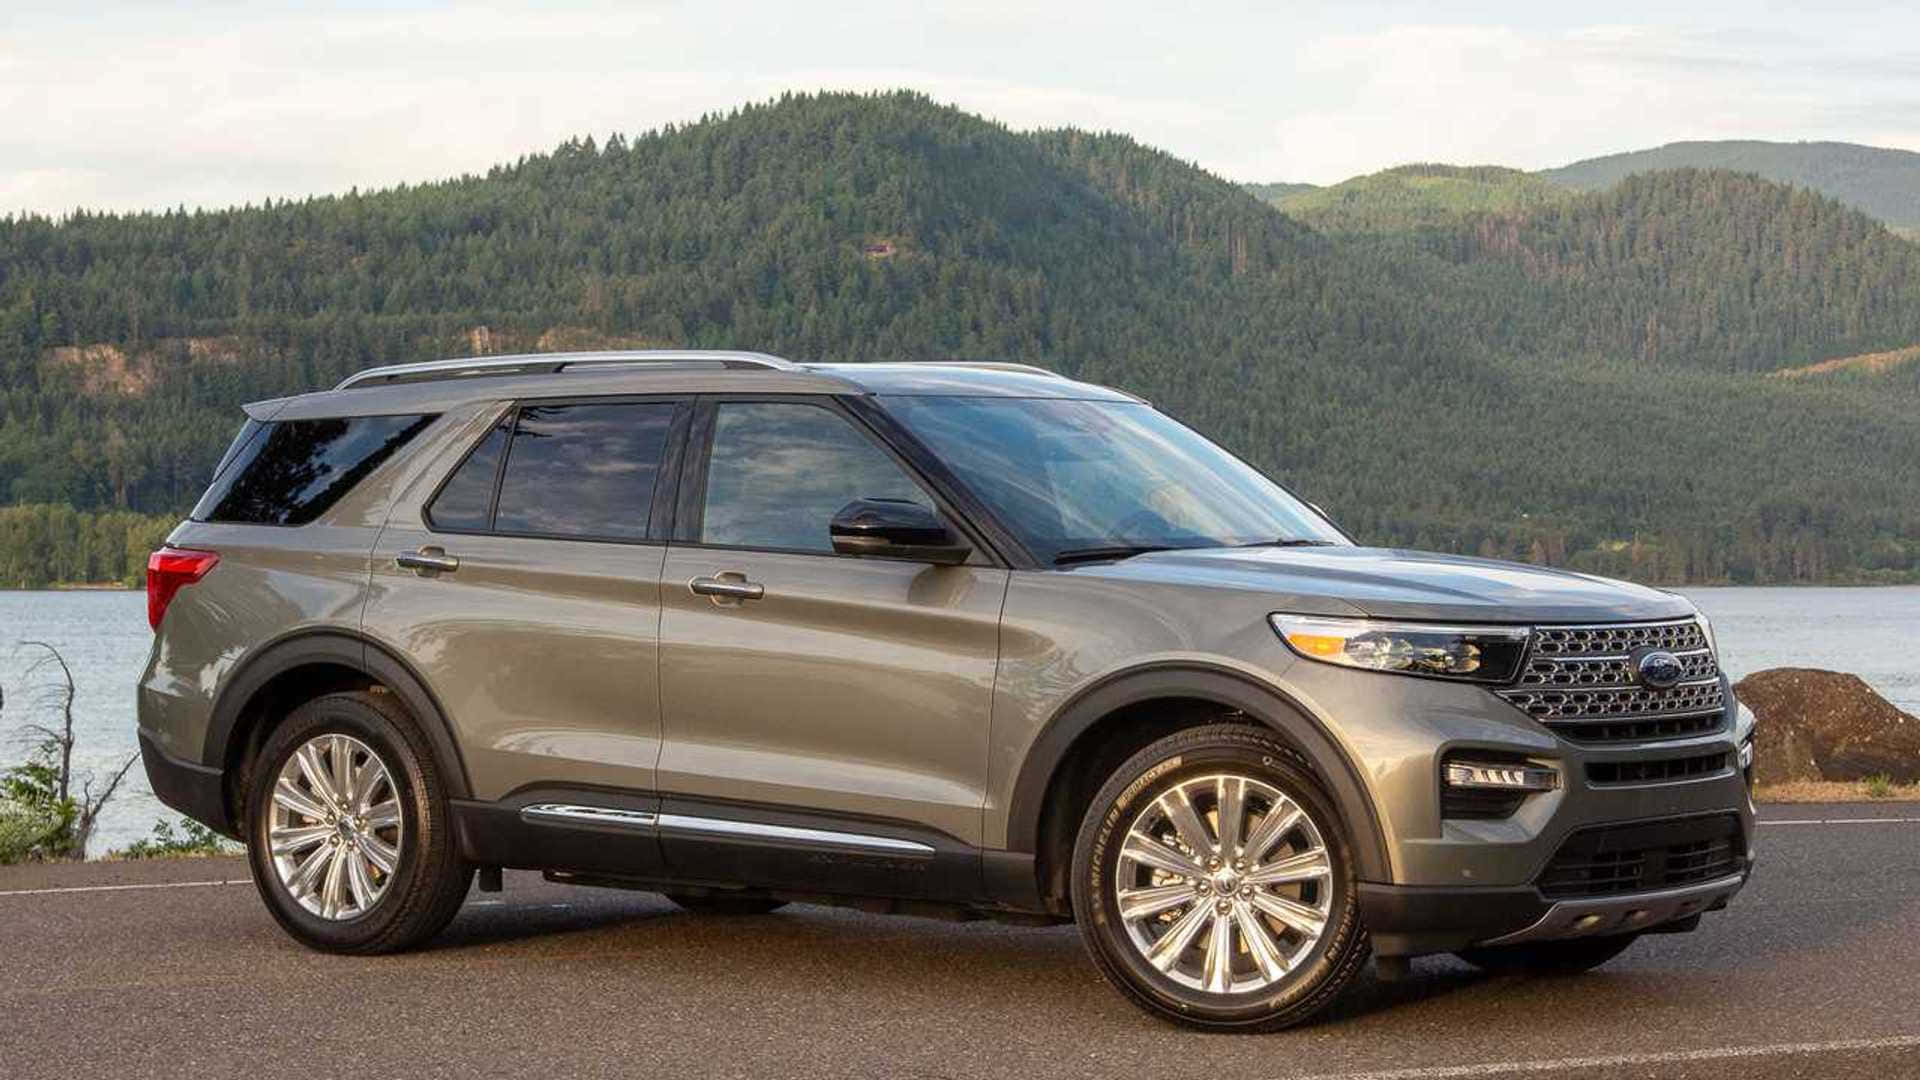 Sleek and Powerful Ford Explorer on Scenic Background Wallpaper